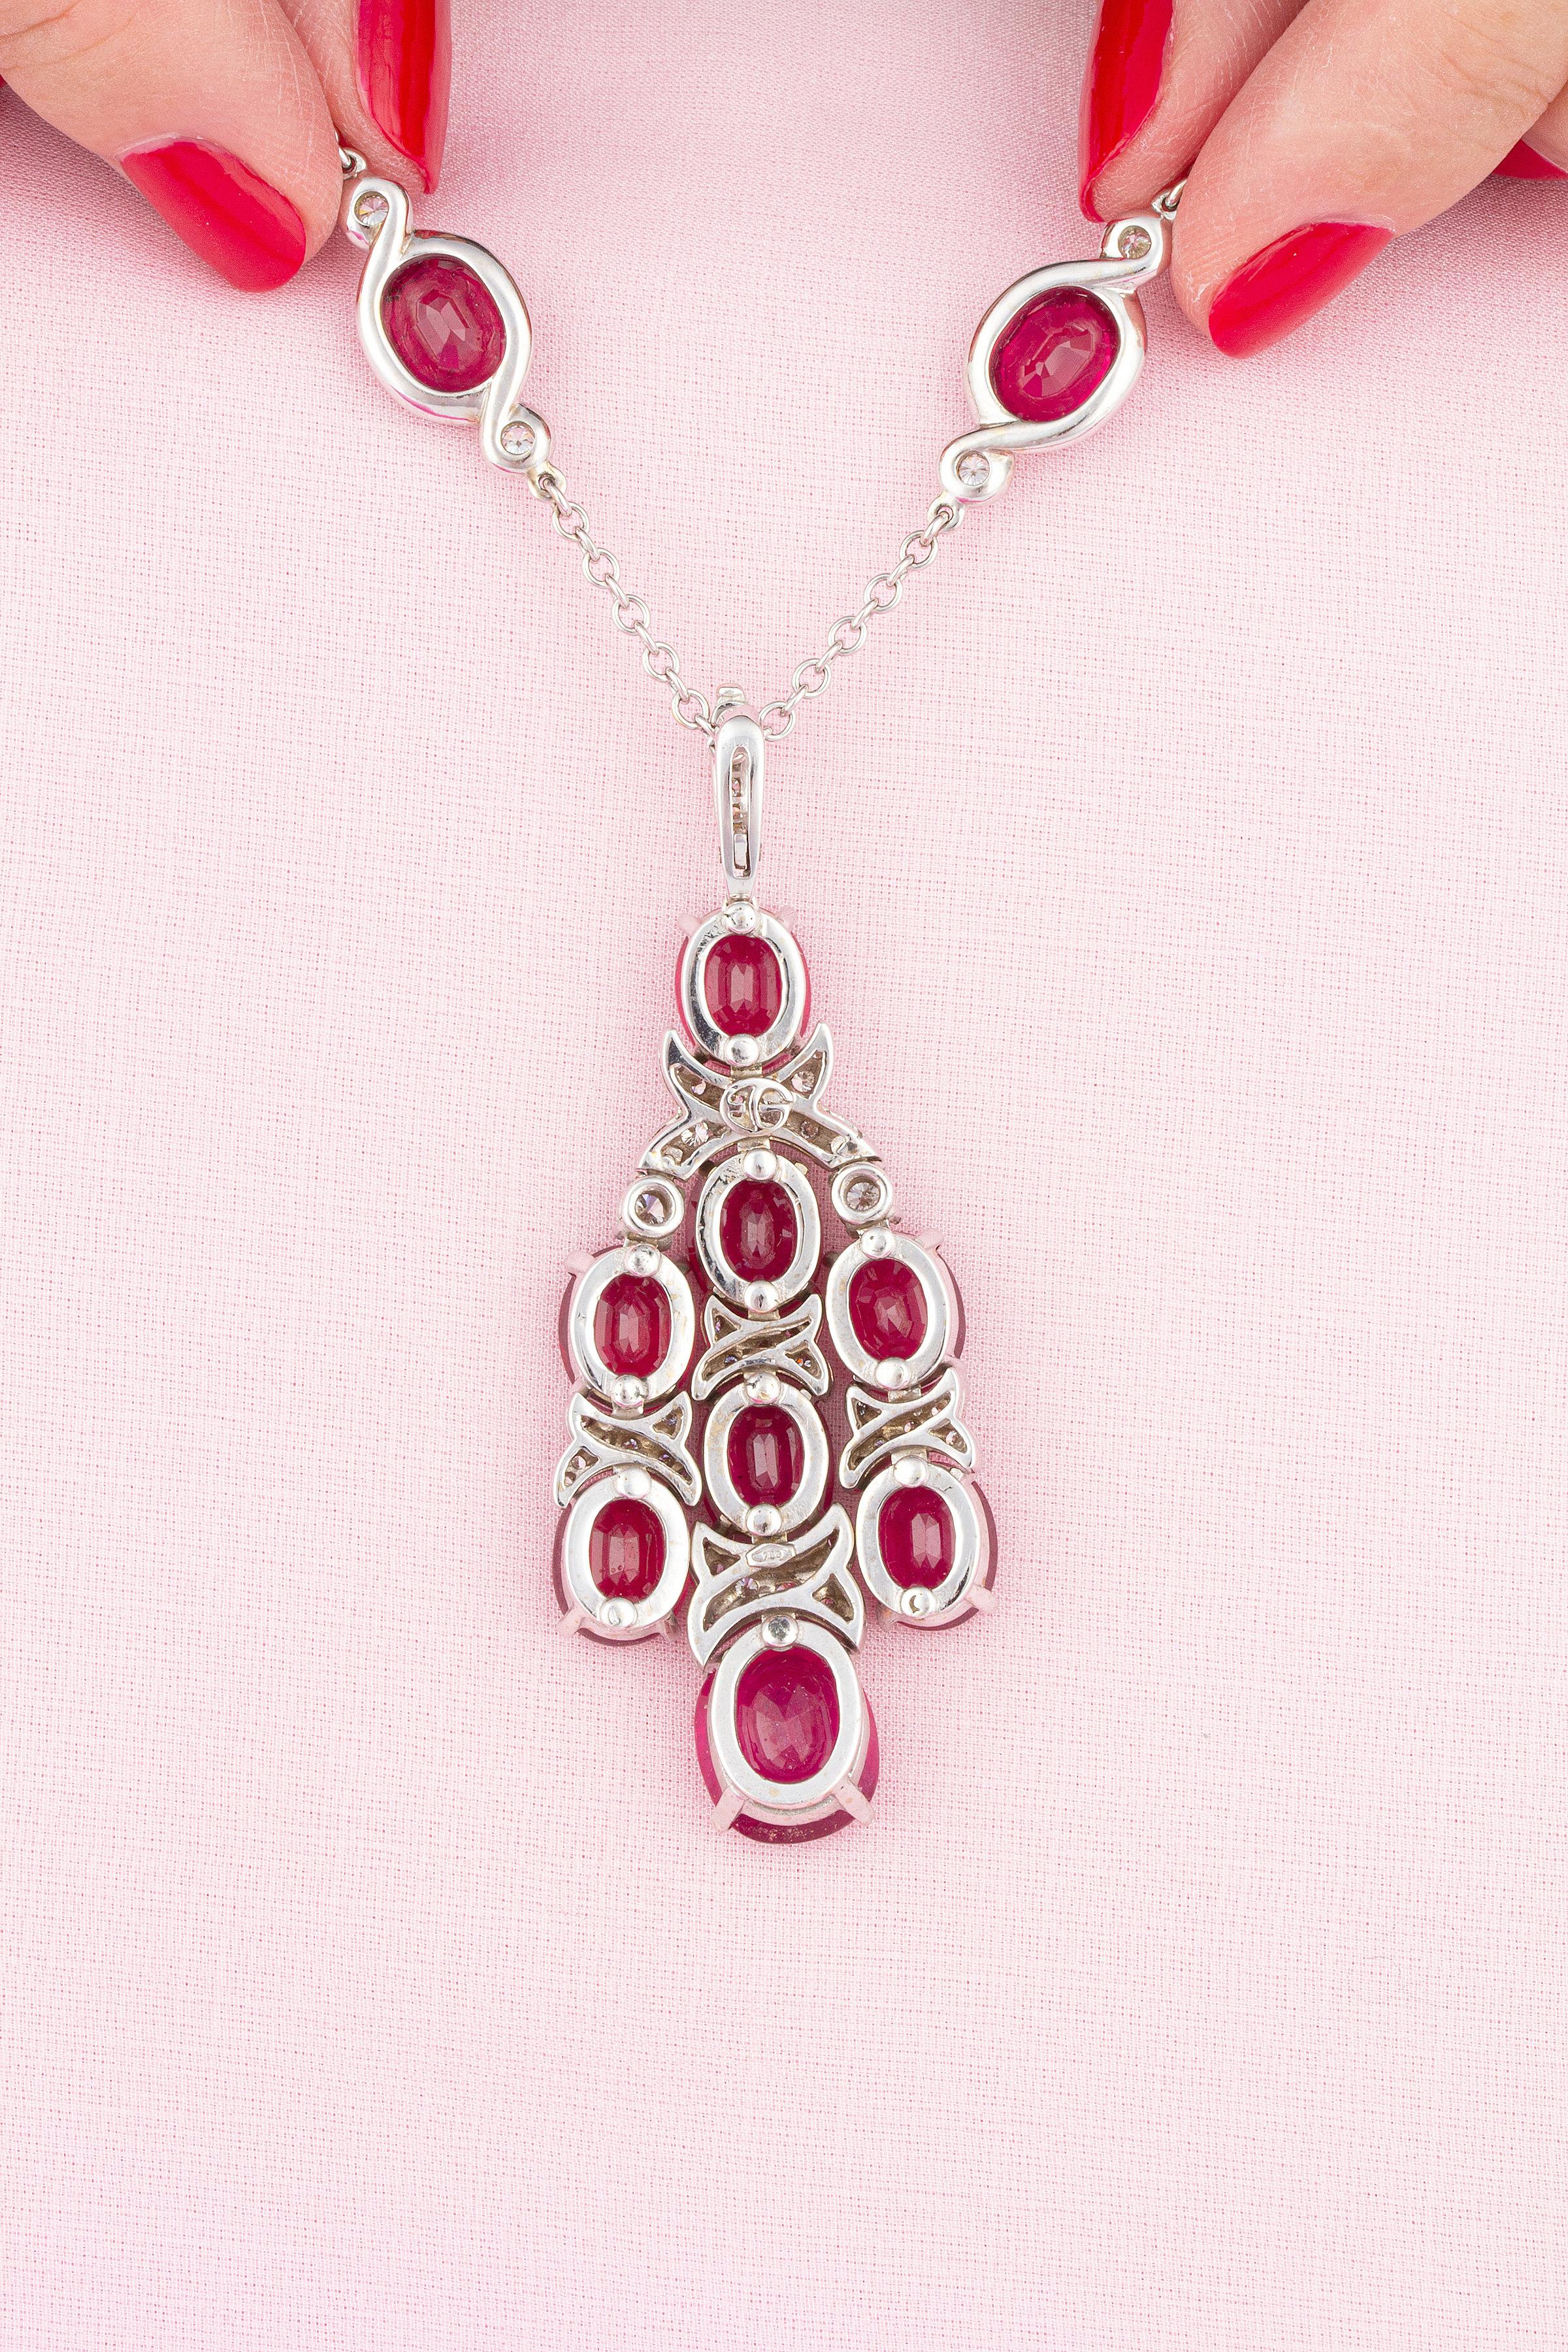 ruby earrings and necklace set